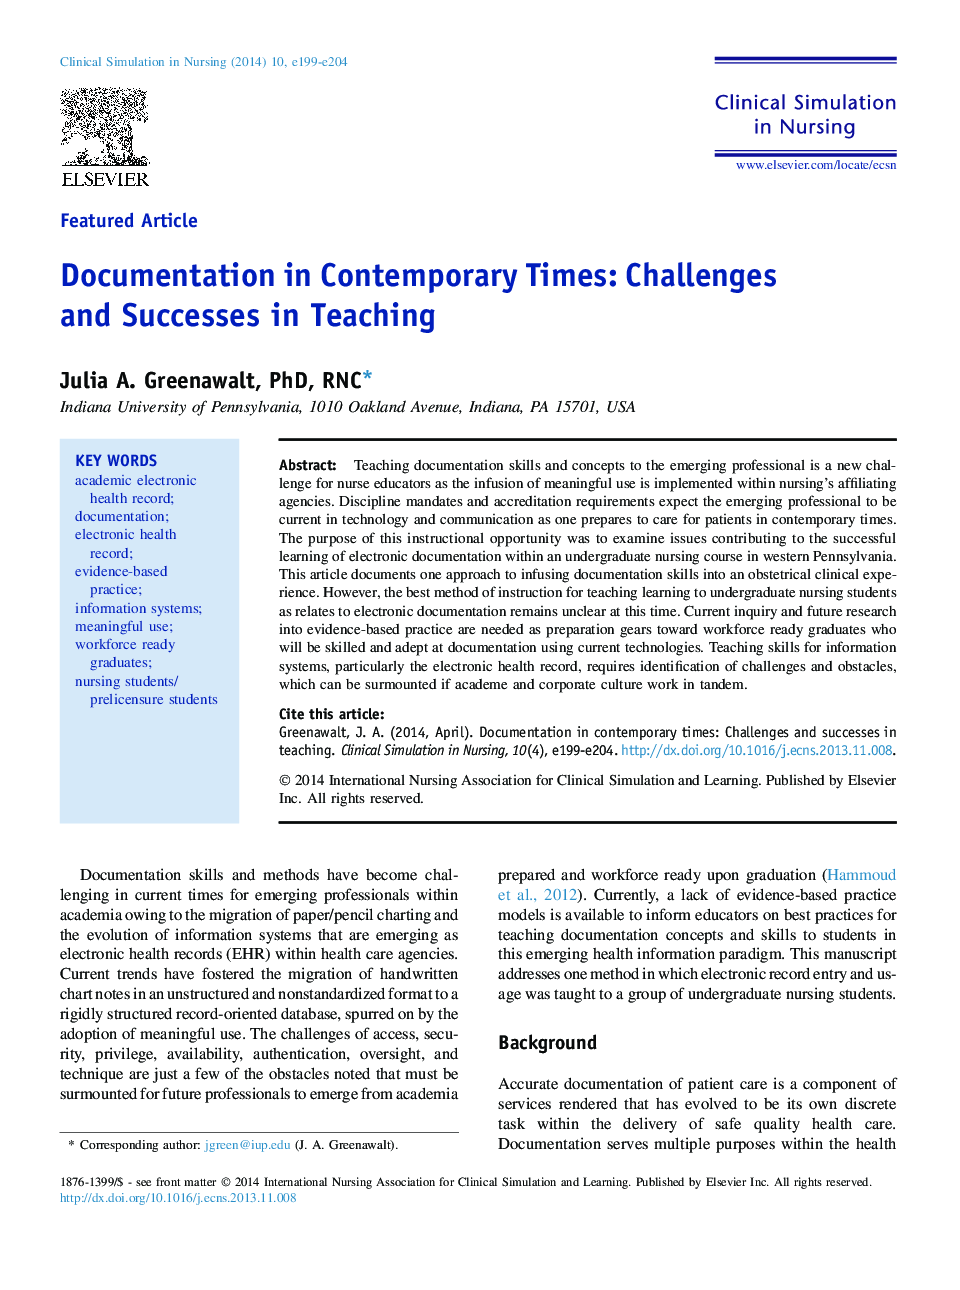 Documentation in Contemporary Times: Challenges and Successes in Teaching